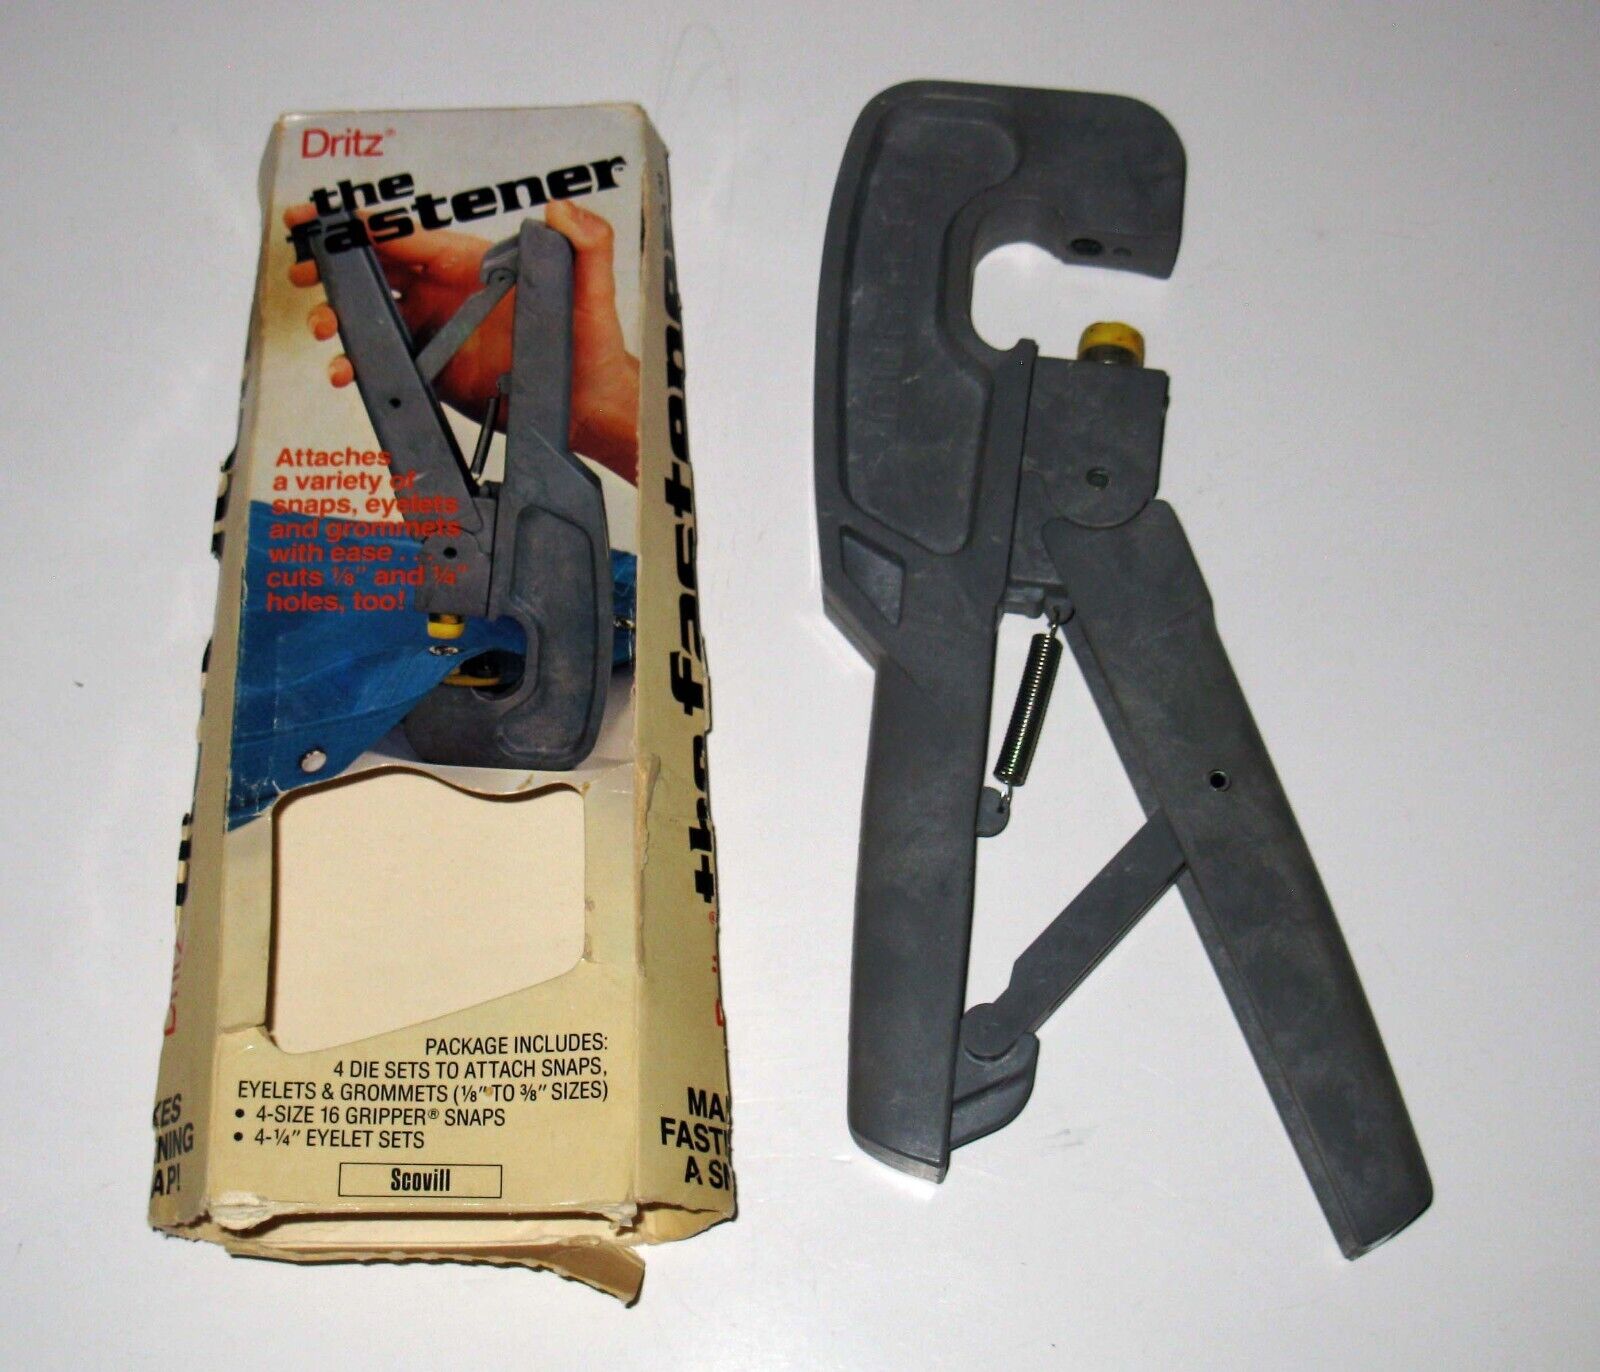 Vintage Dritz The Fastener Snap Hole Punch Pliers Scovill in Box No Attachments